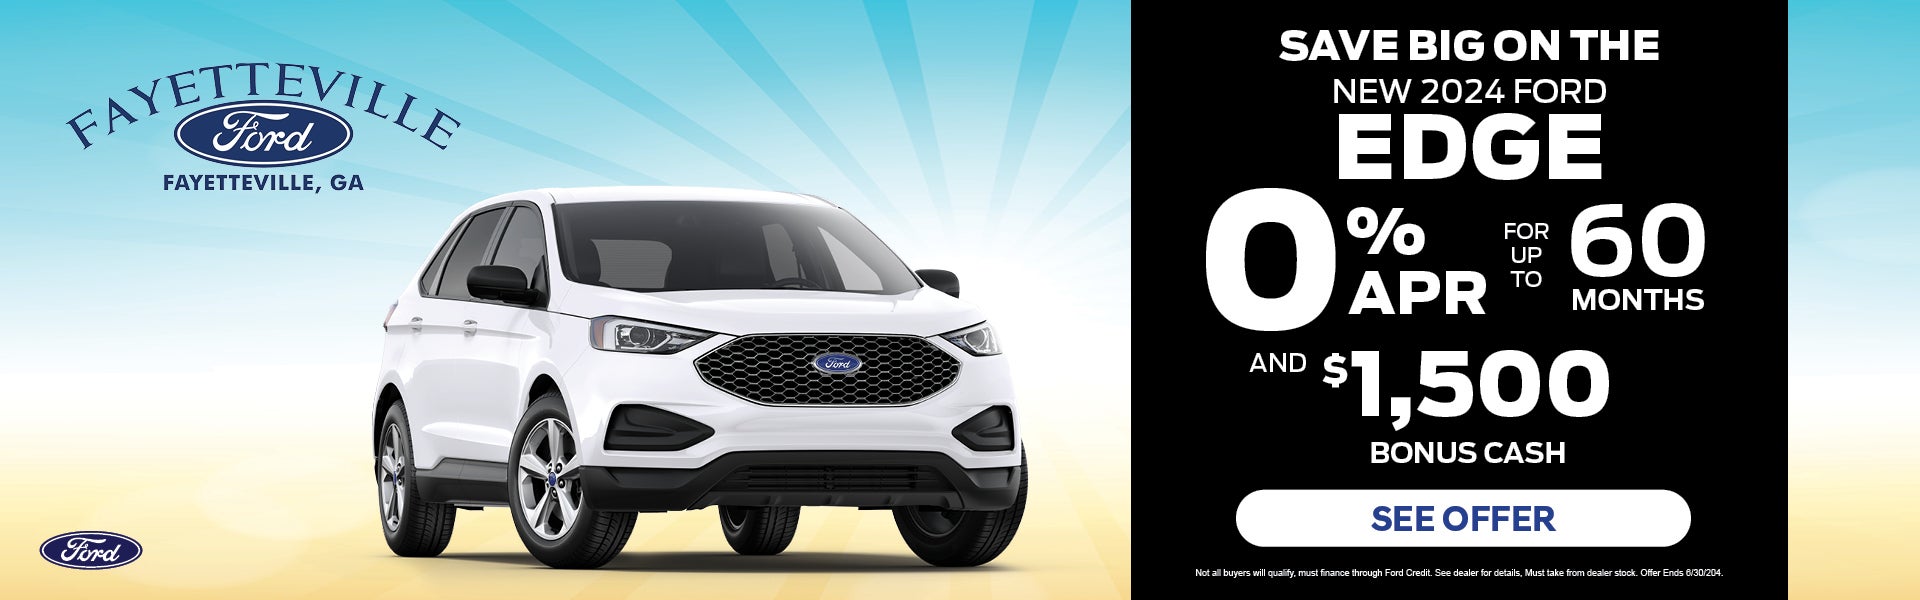 New 2024 Ford Edge, 0% APR upto 60 Months